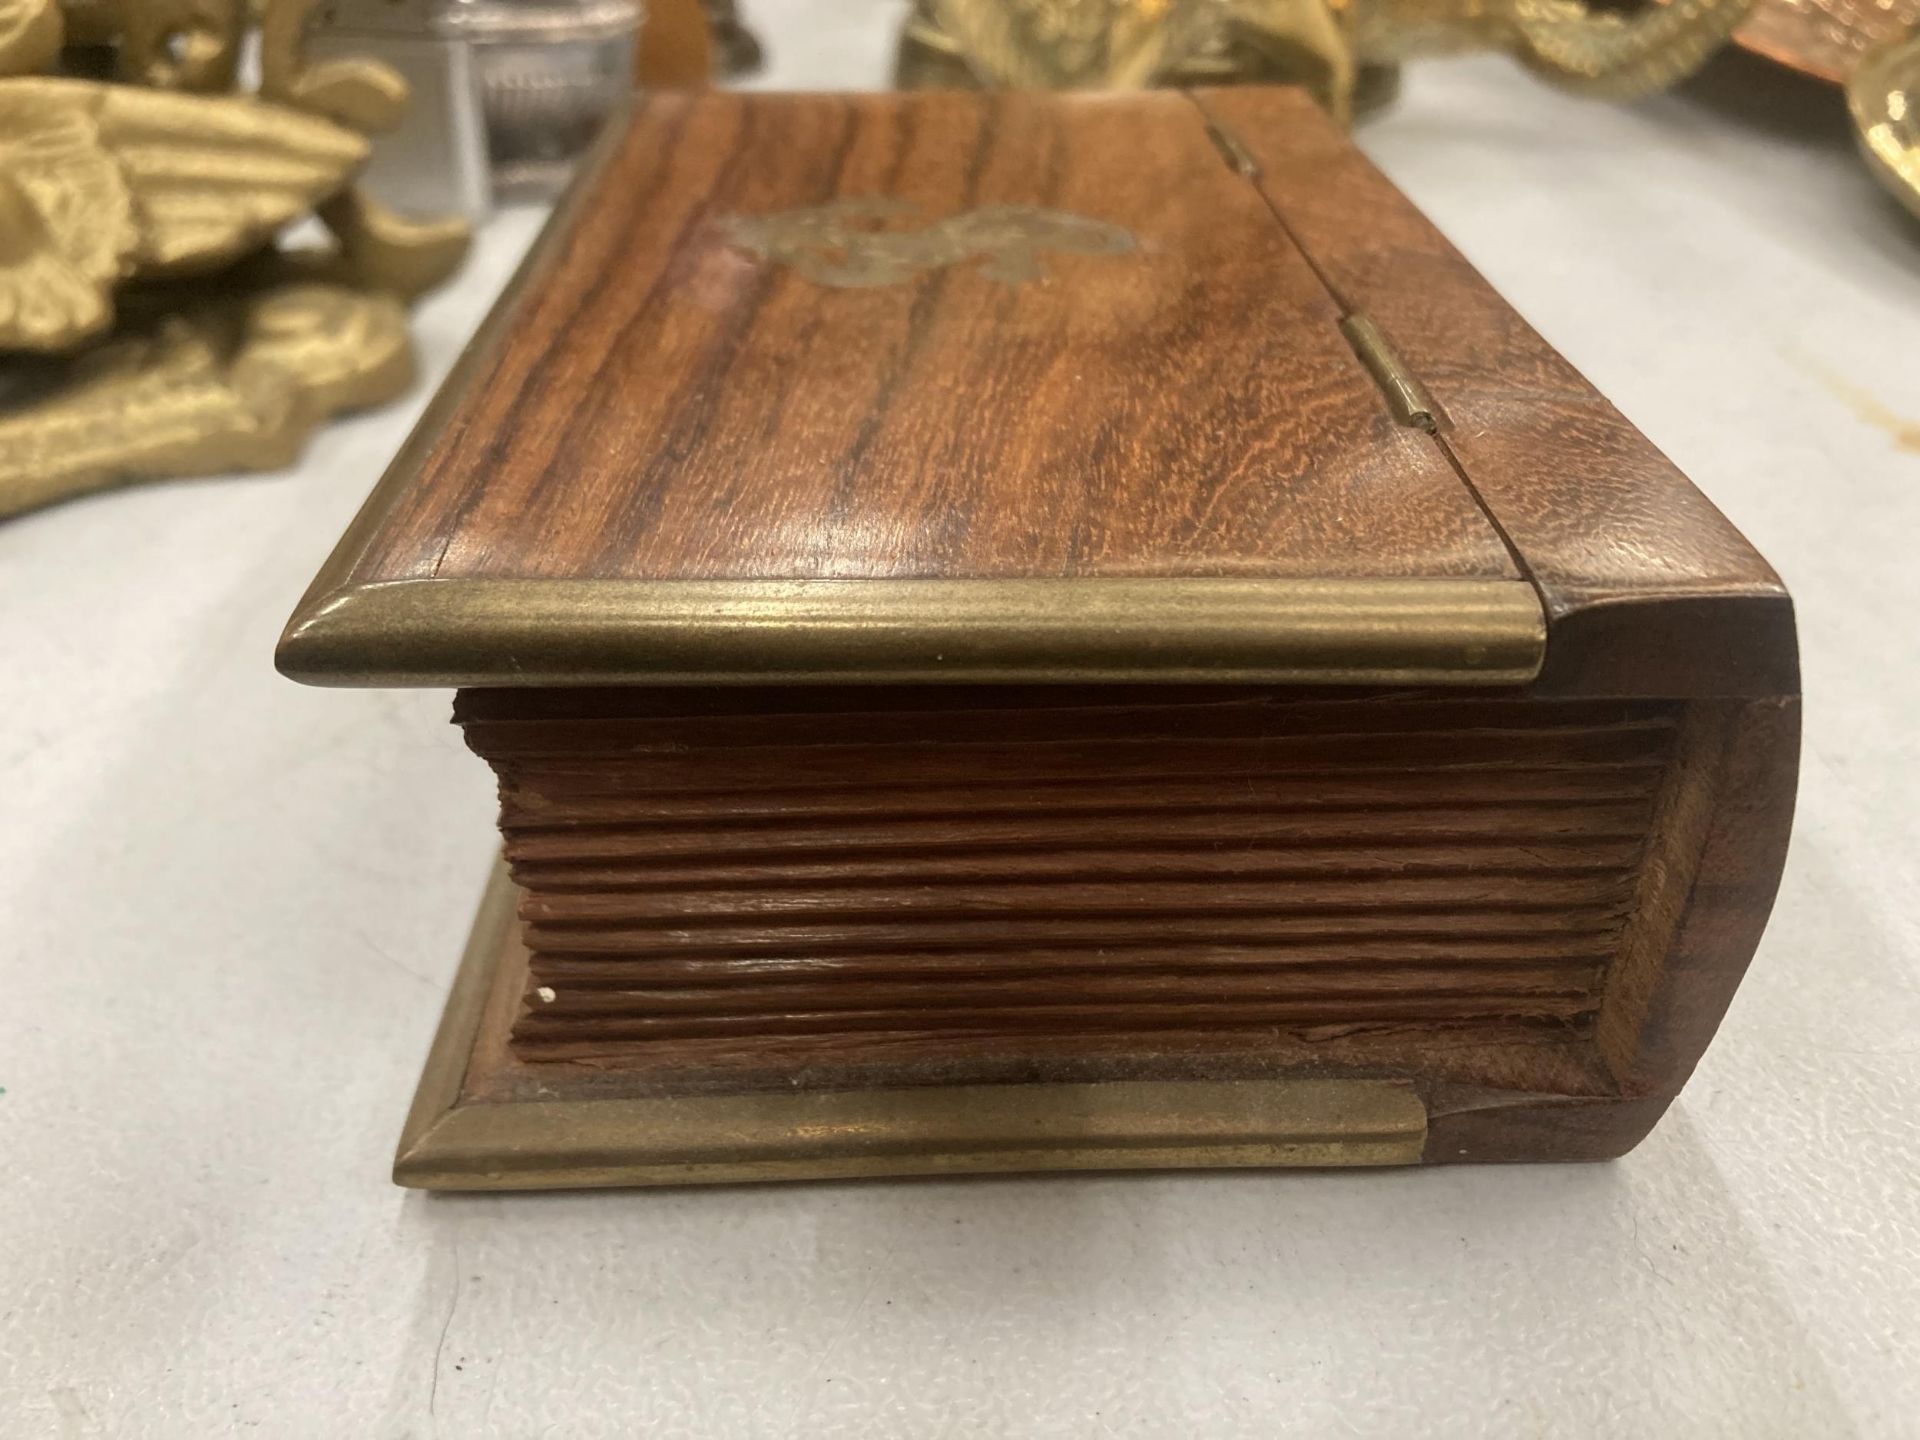 A MAHOGANY BOX IN THE SHAPE OF A BOOK WITH BRASS EDGES AND AN ANCHOR MOTIF TO THE LID - Image 3 of 3